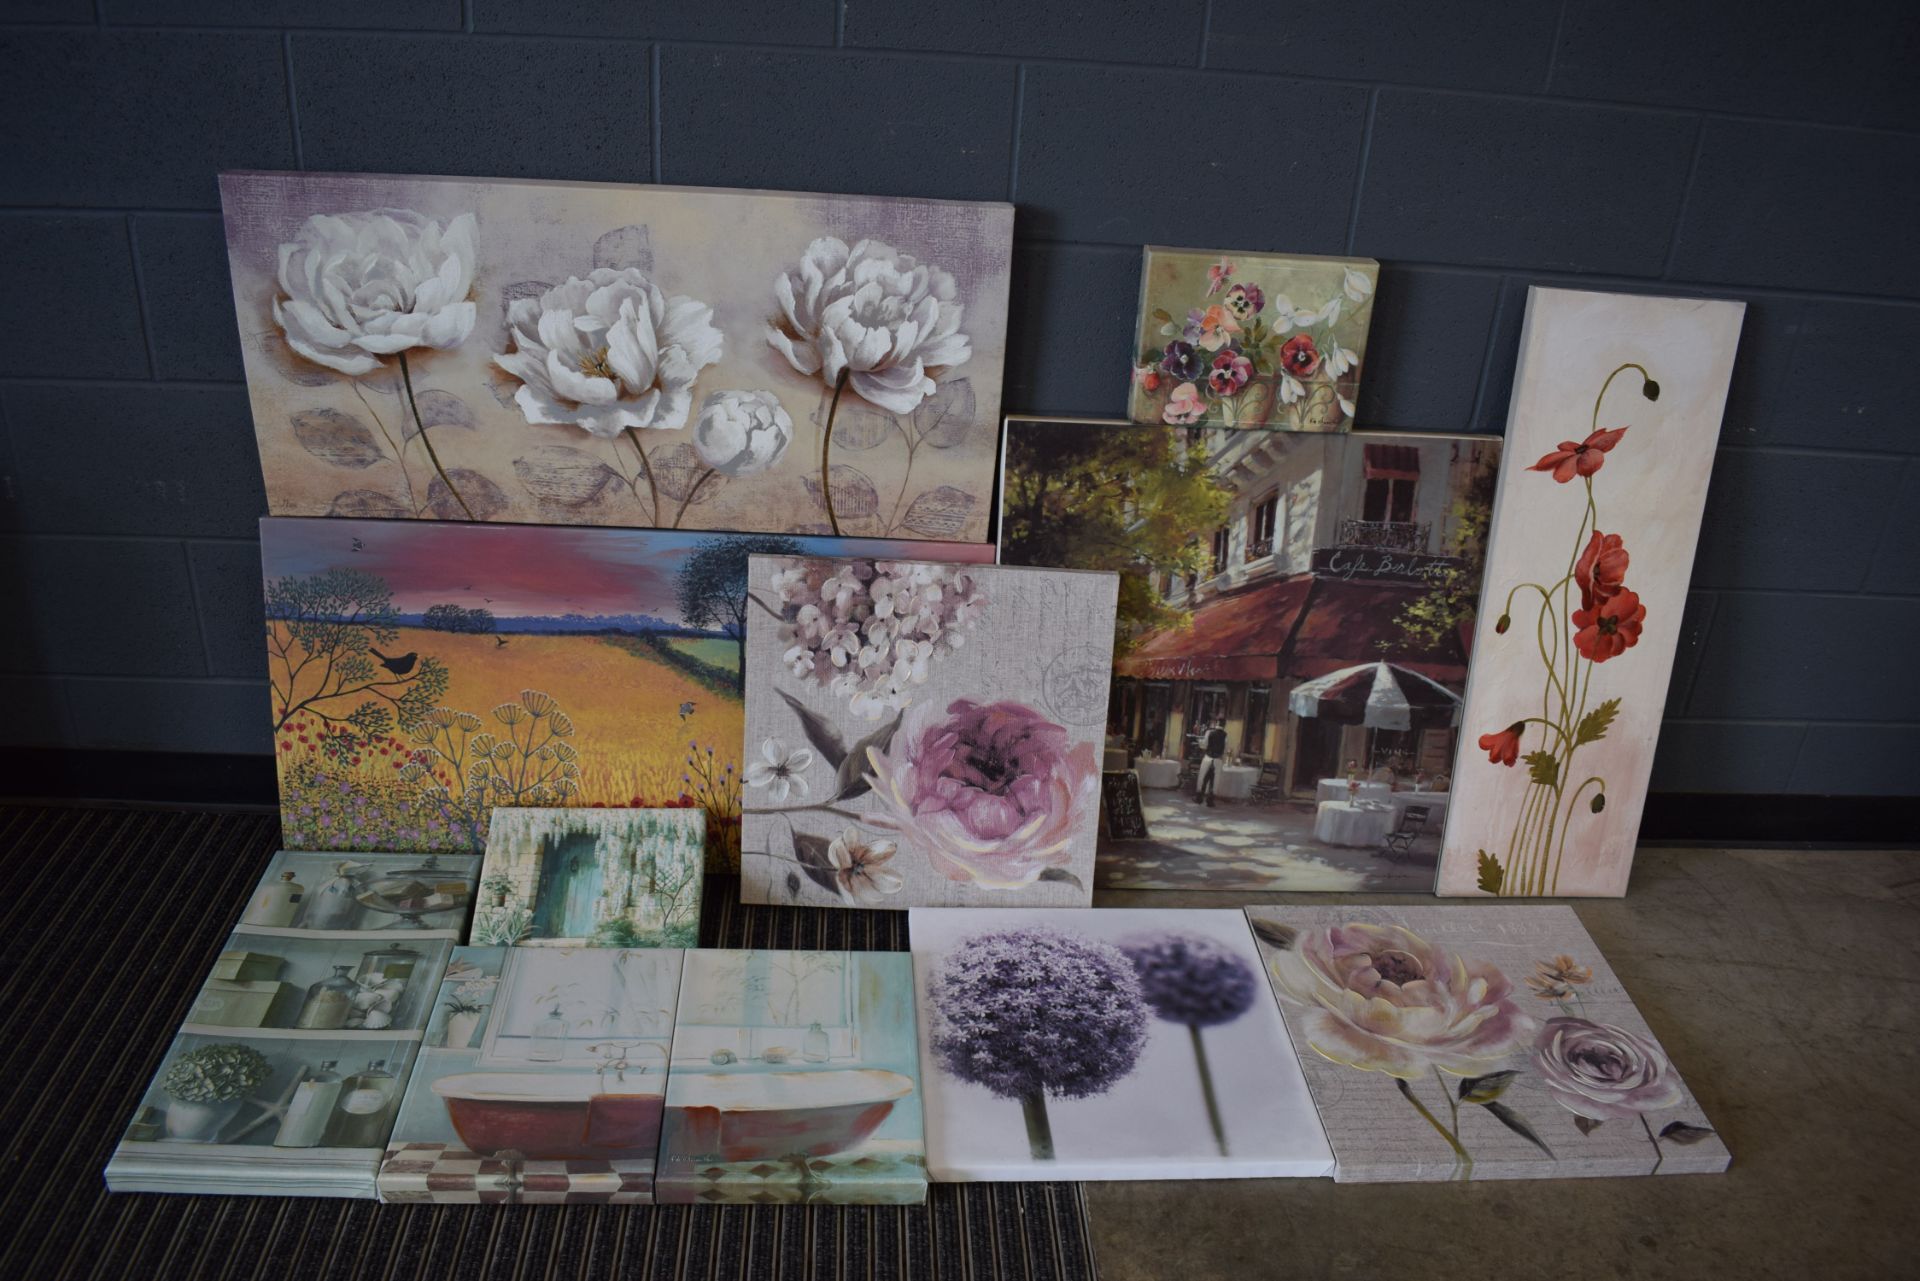 Stack of modern and printed canvases, mostly still life and floral arrangements